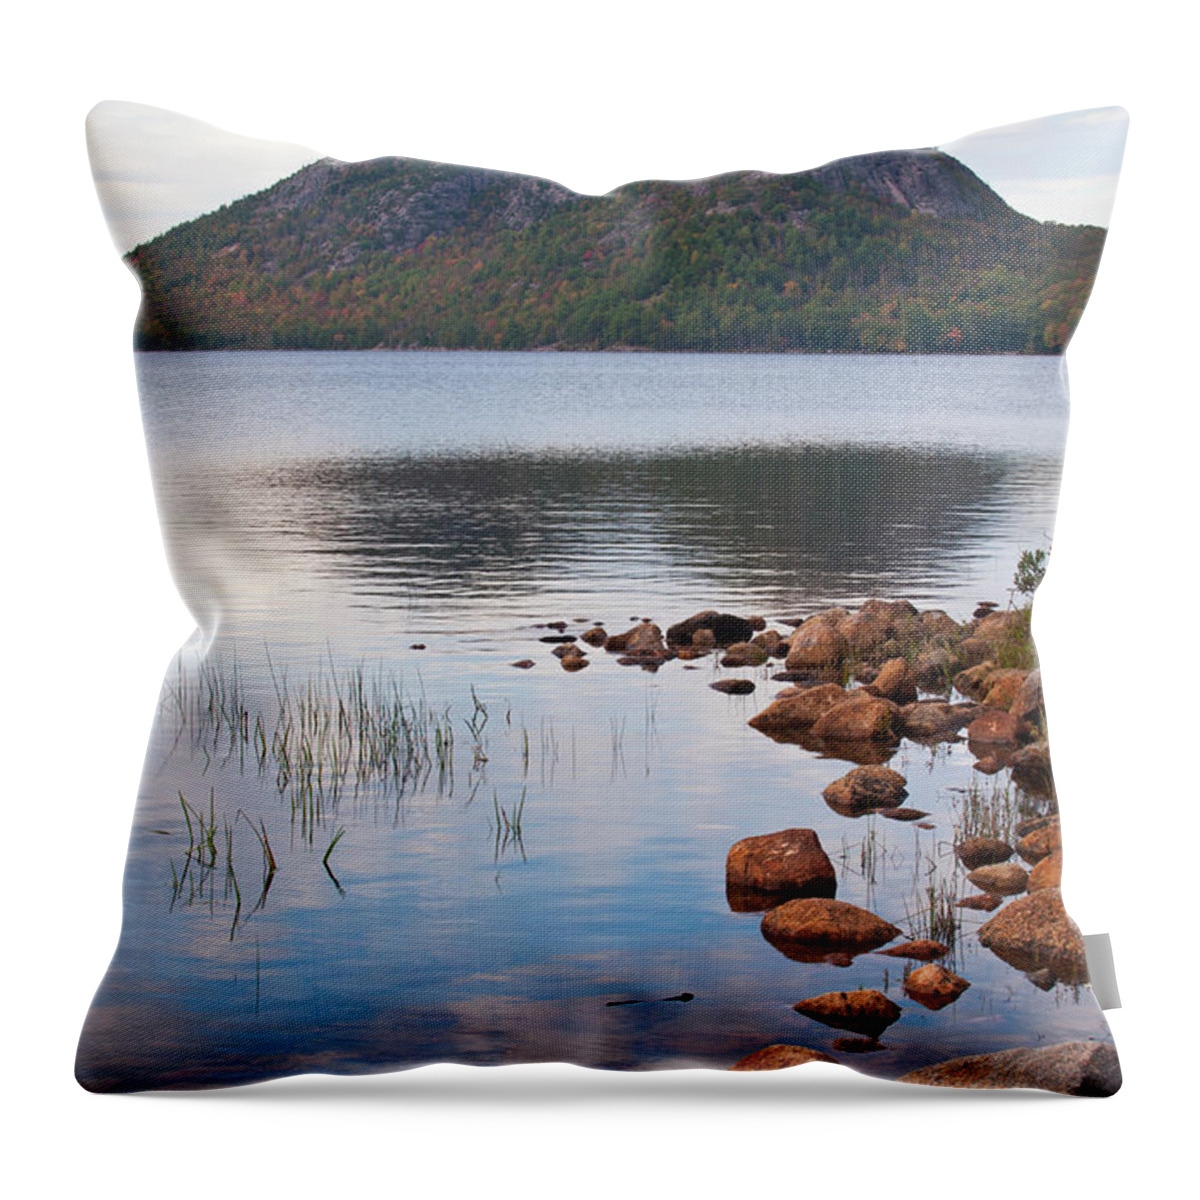 Scenics Throw Pillow featuring the photograph Acadia National Park, Maine--jordan Pond by Ed Reschke